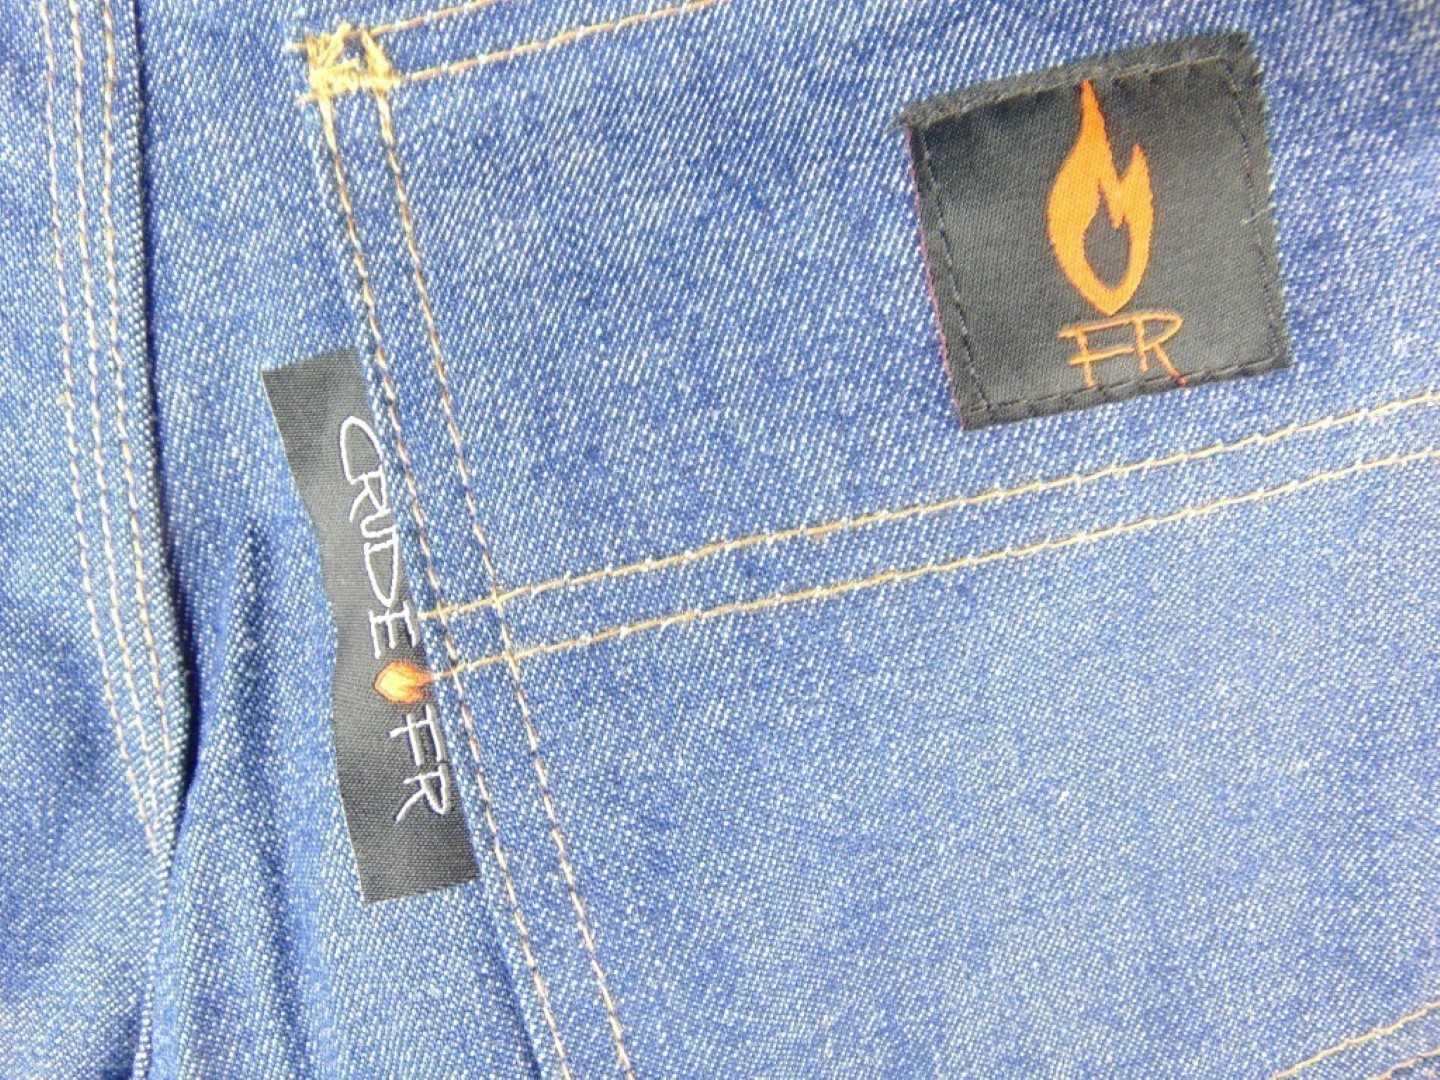 56x38U CRUDE FR / Flame Resistant Jeans (Unfinished Seam)